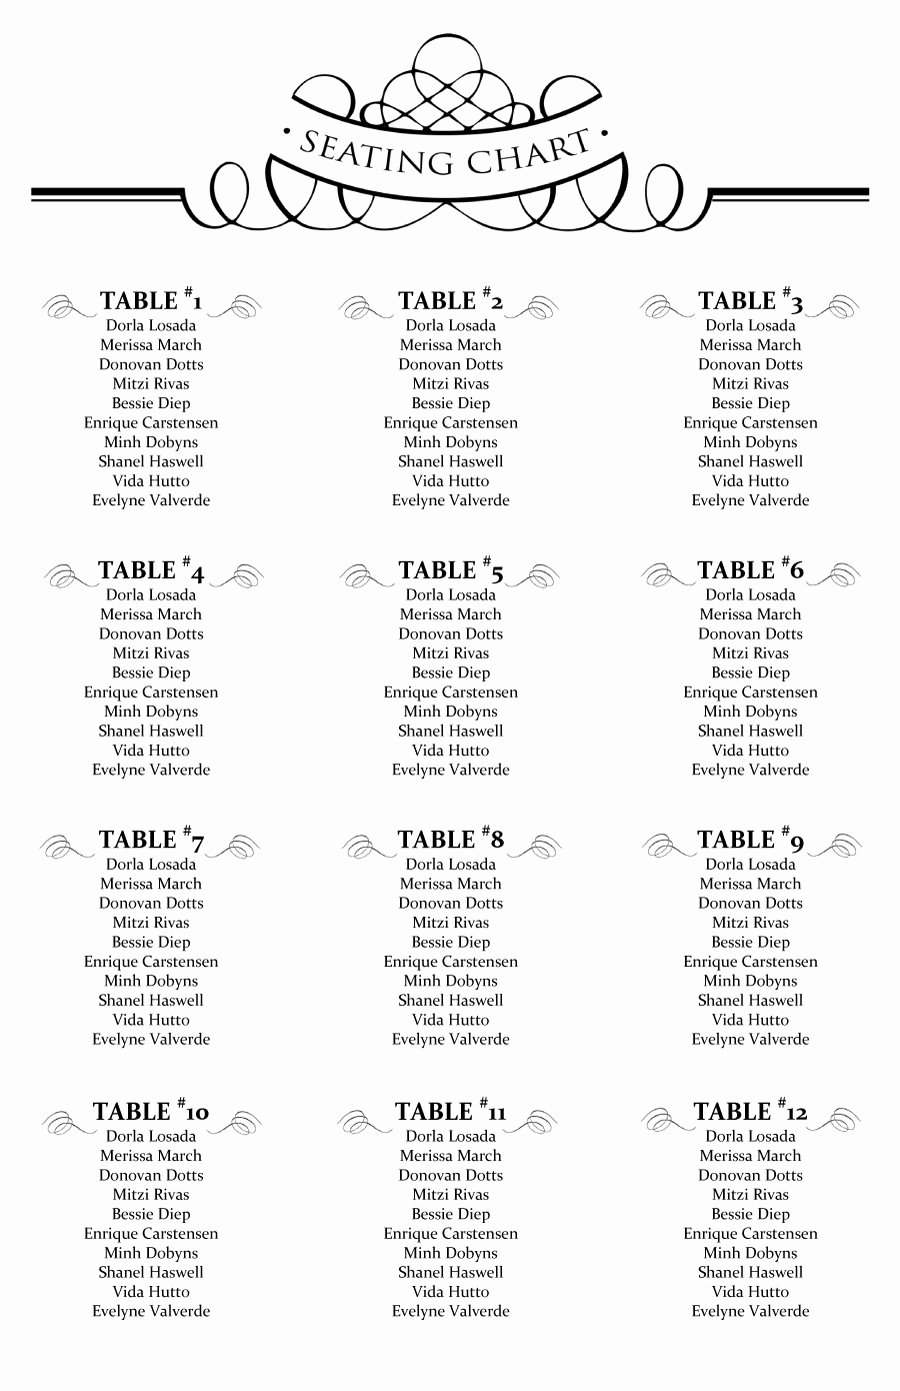 Free Seating Chart Template Inspirational 40 Great Seating Chart Templates Wedding Classroom More